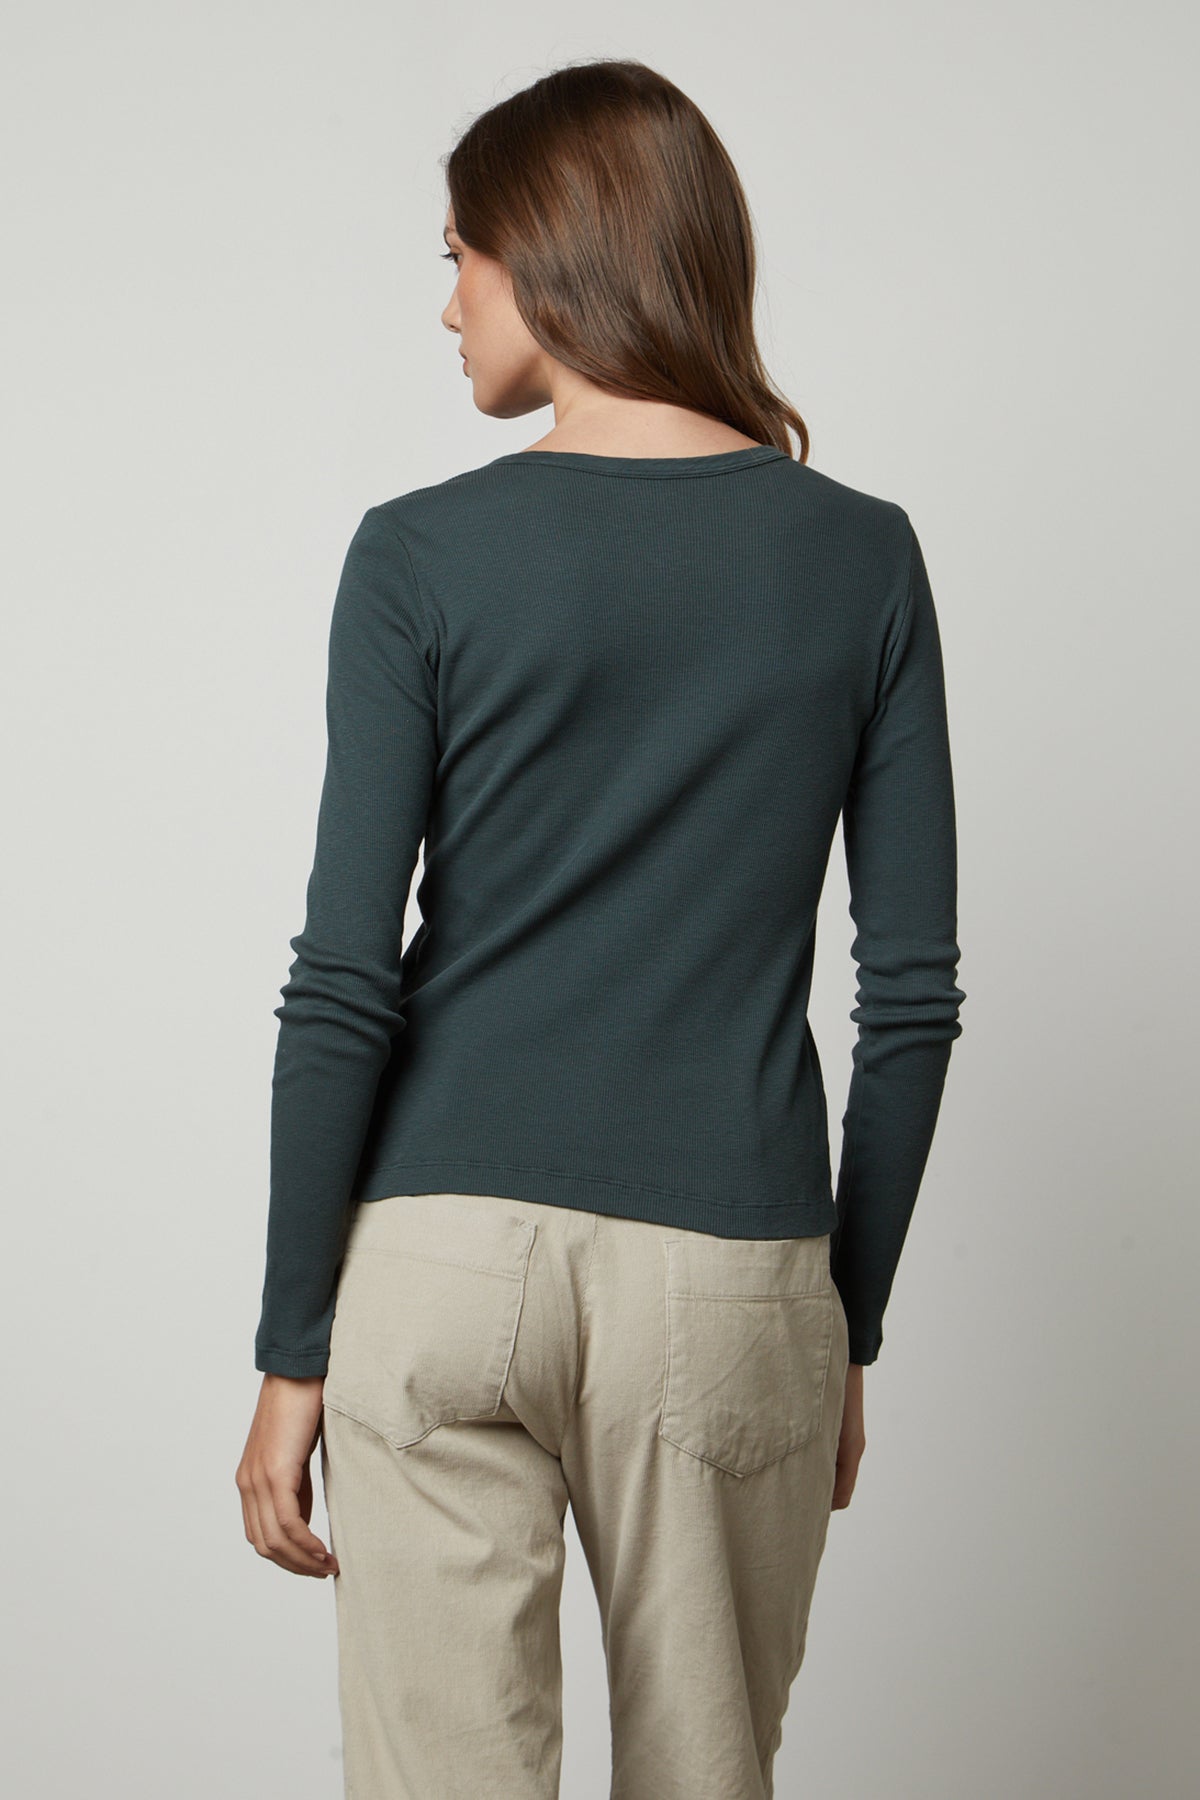 The back view of a woman wearing a Velvet by Graham & Spencer BAYLER RIBBED SCOOP NECK TEE top and khaki pants.-35782696665281